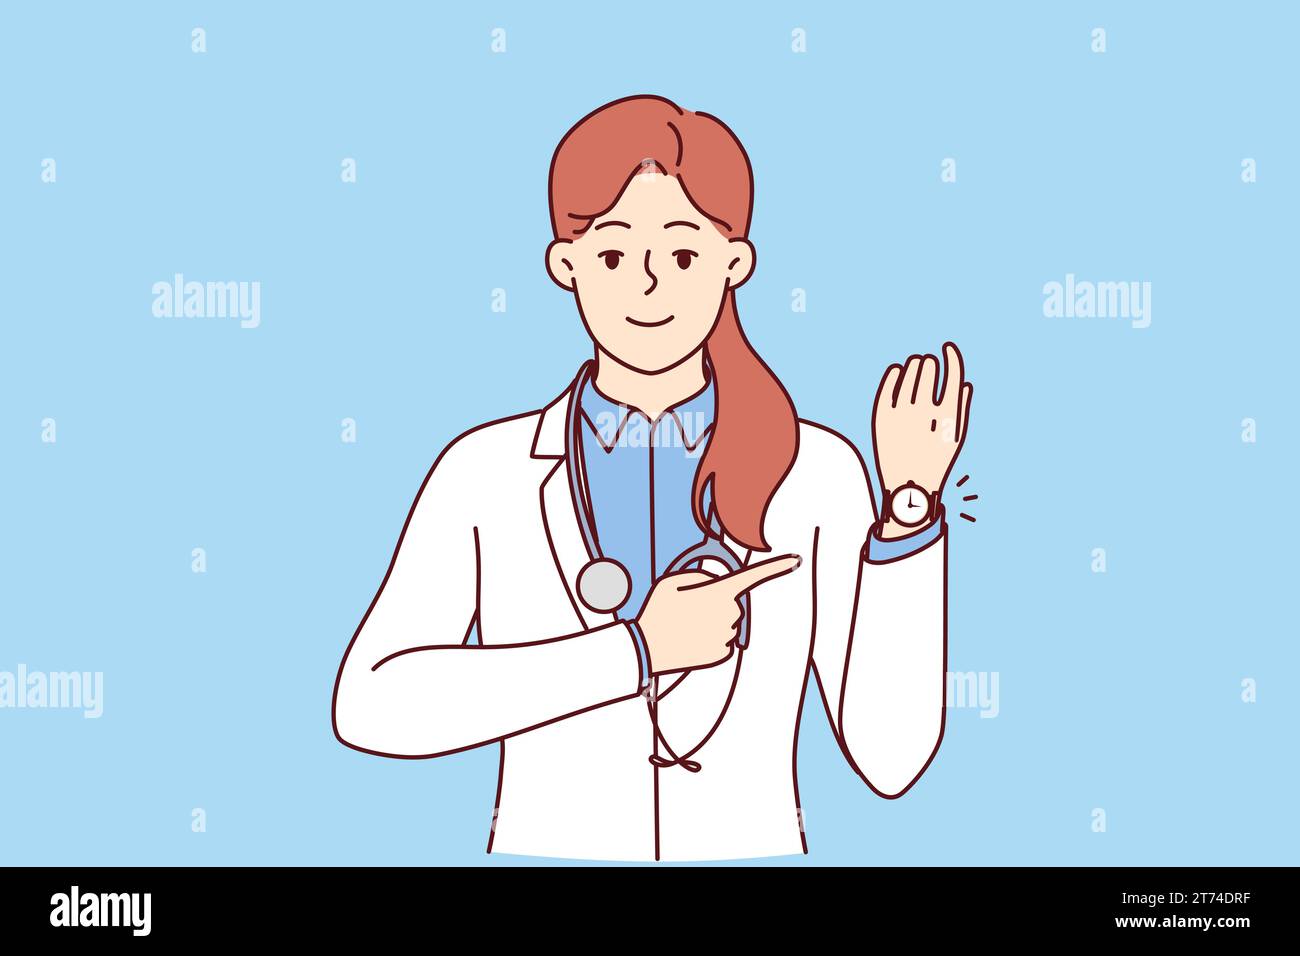 Punctual girl Stock Vector Images - Alamy